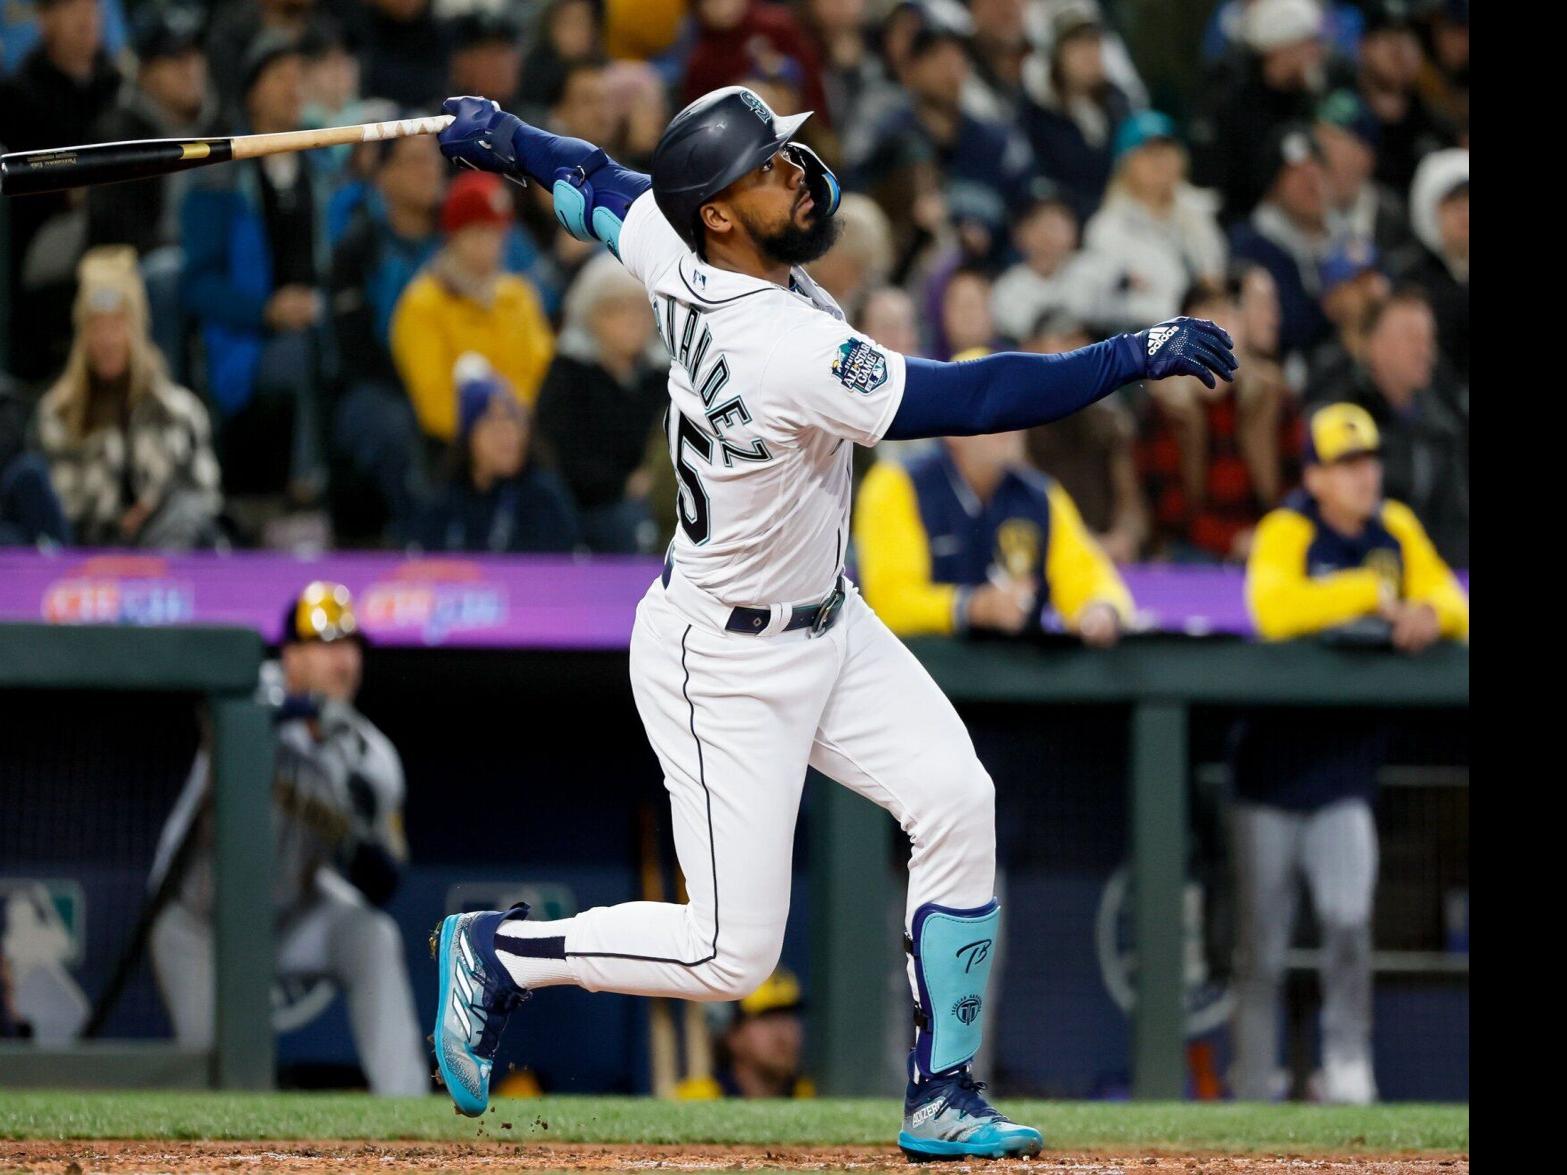 Mariners remove Blue Jays merchandise from Seattle team store